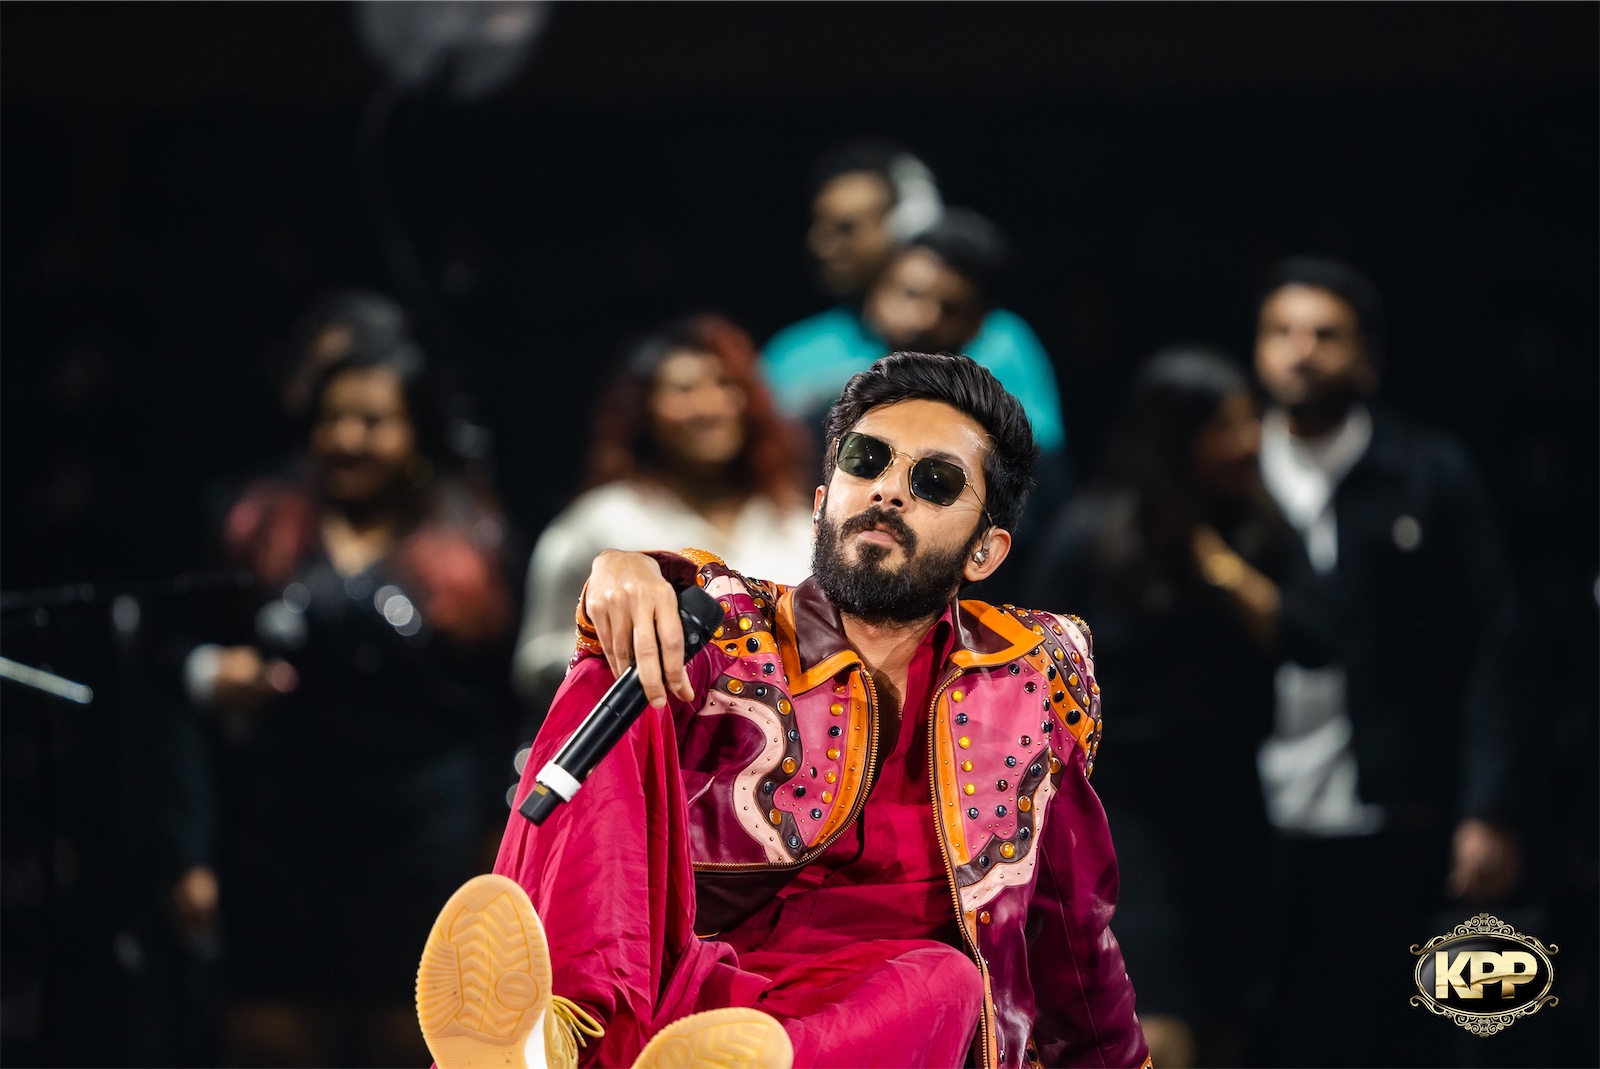 Anirudh Live "Once Upon A Time" Tour 2023 United States Dates